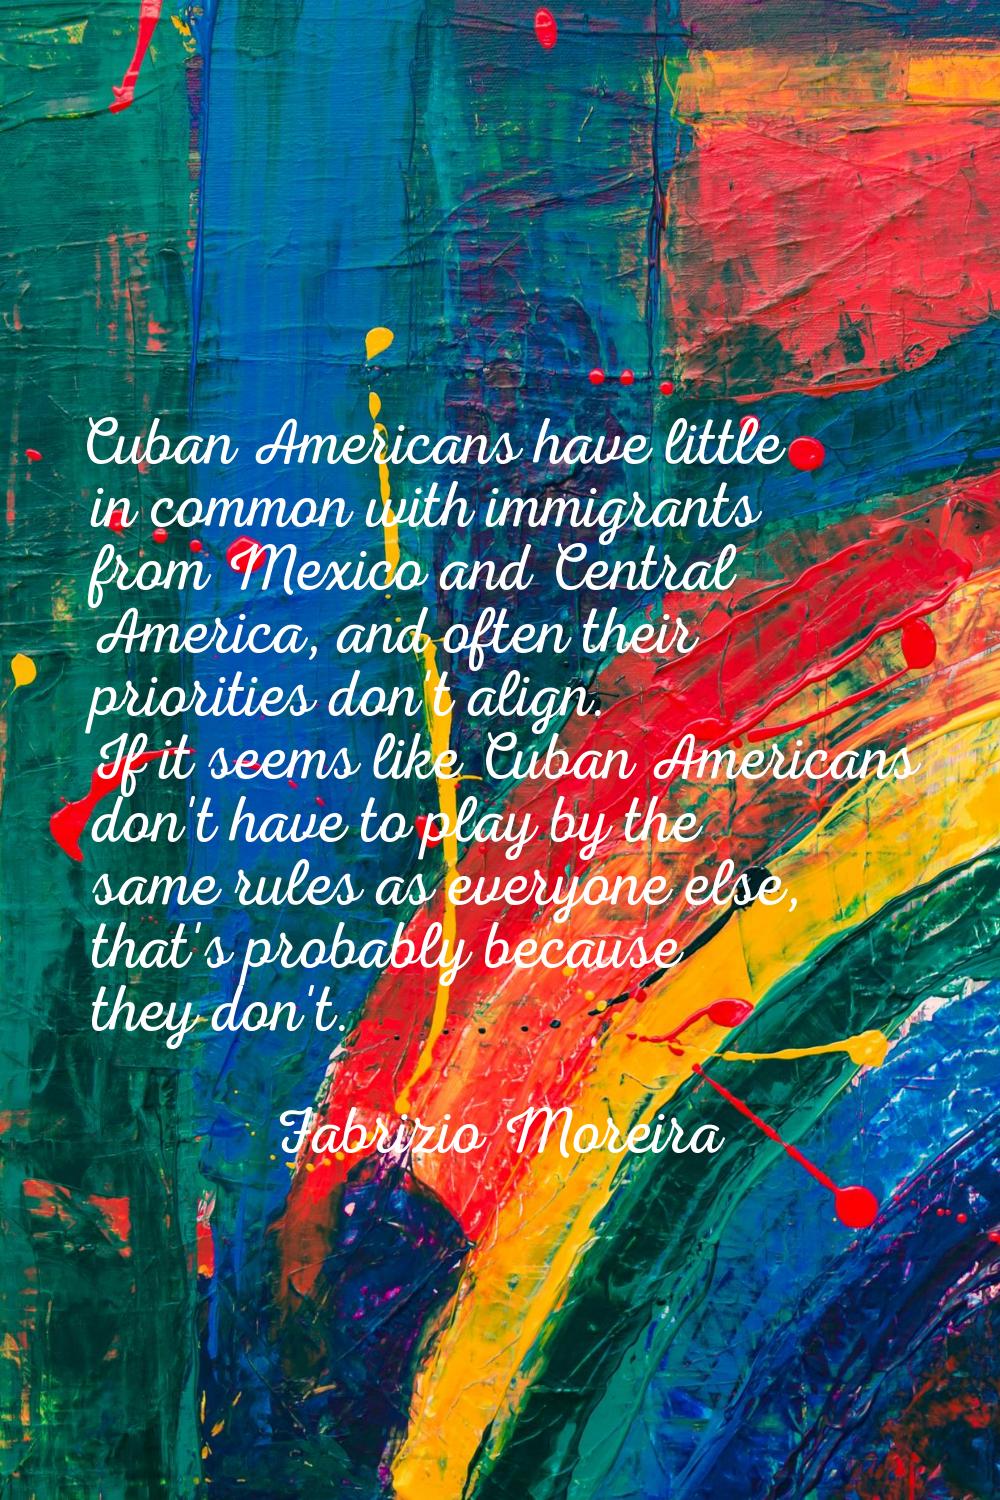 Cuban Americans have little in common with immigrants from Mexico and Central America, and often th